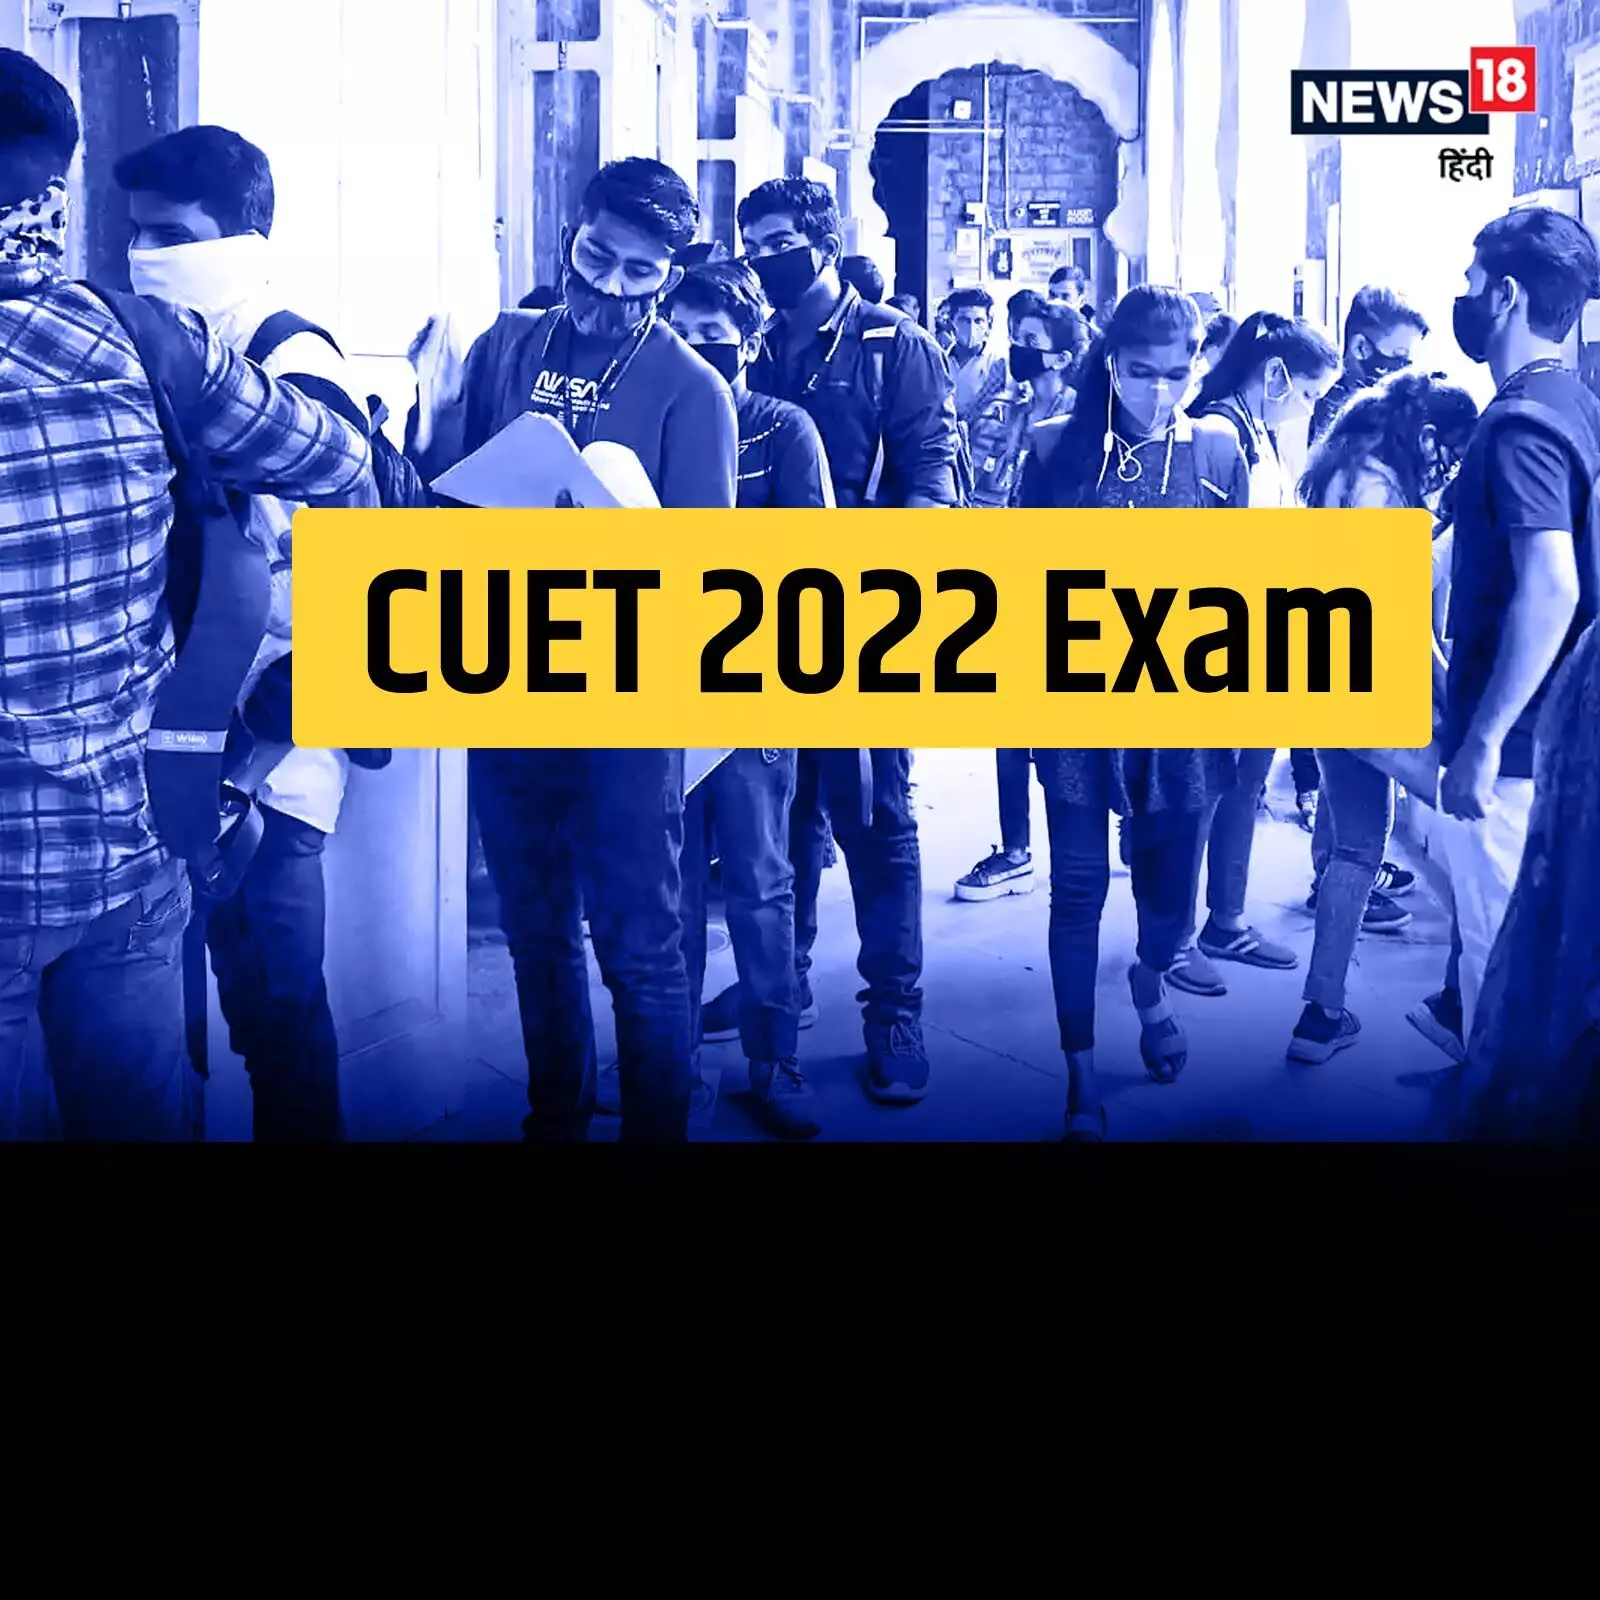 cuet pg 2022 exam application process start today exams by third week of july 2022